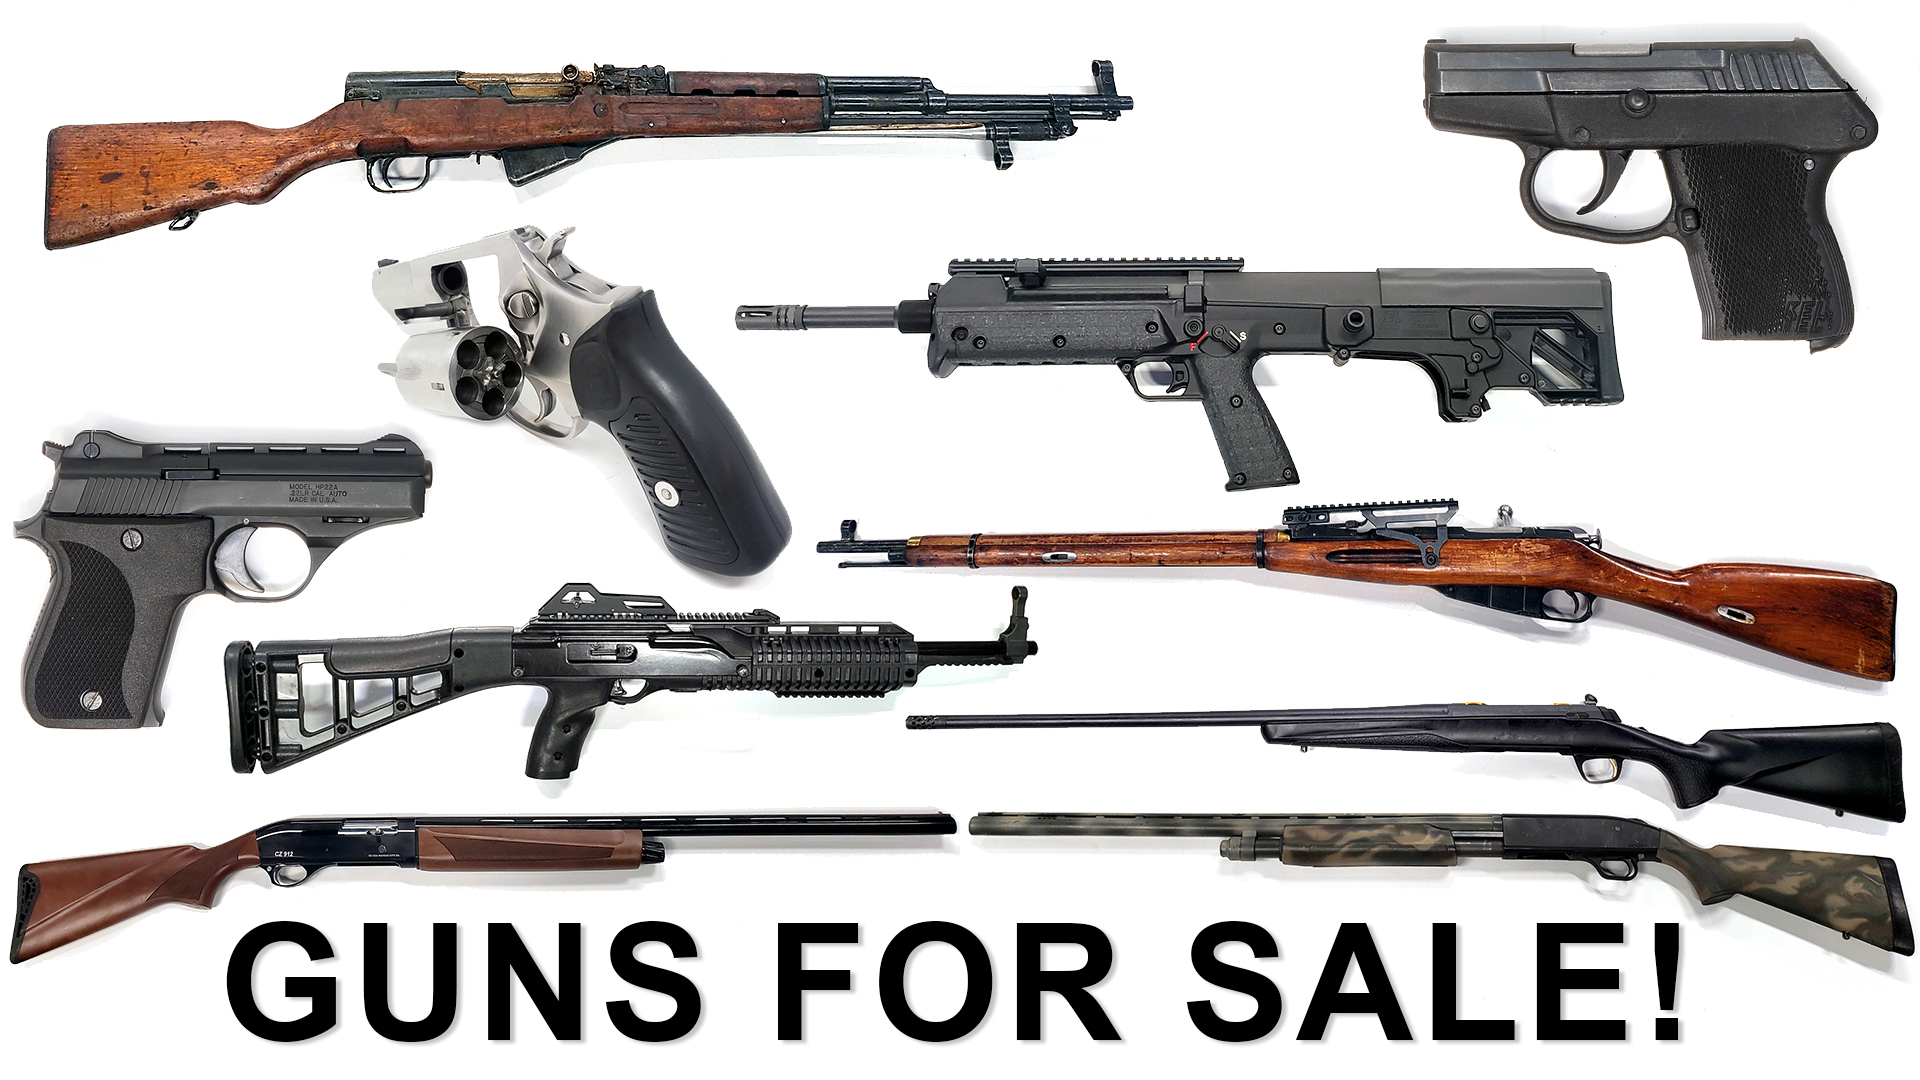 M*CARBO Used Guns For Sale